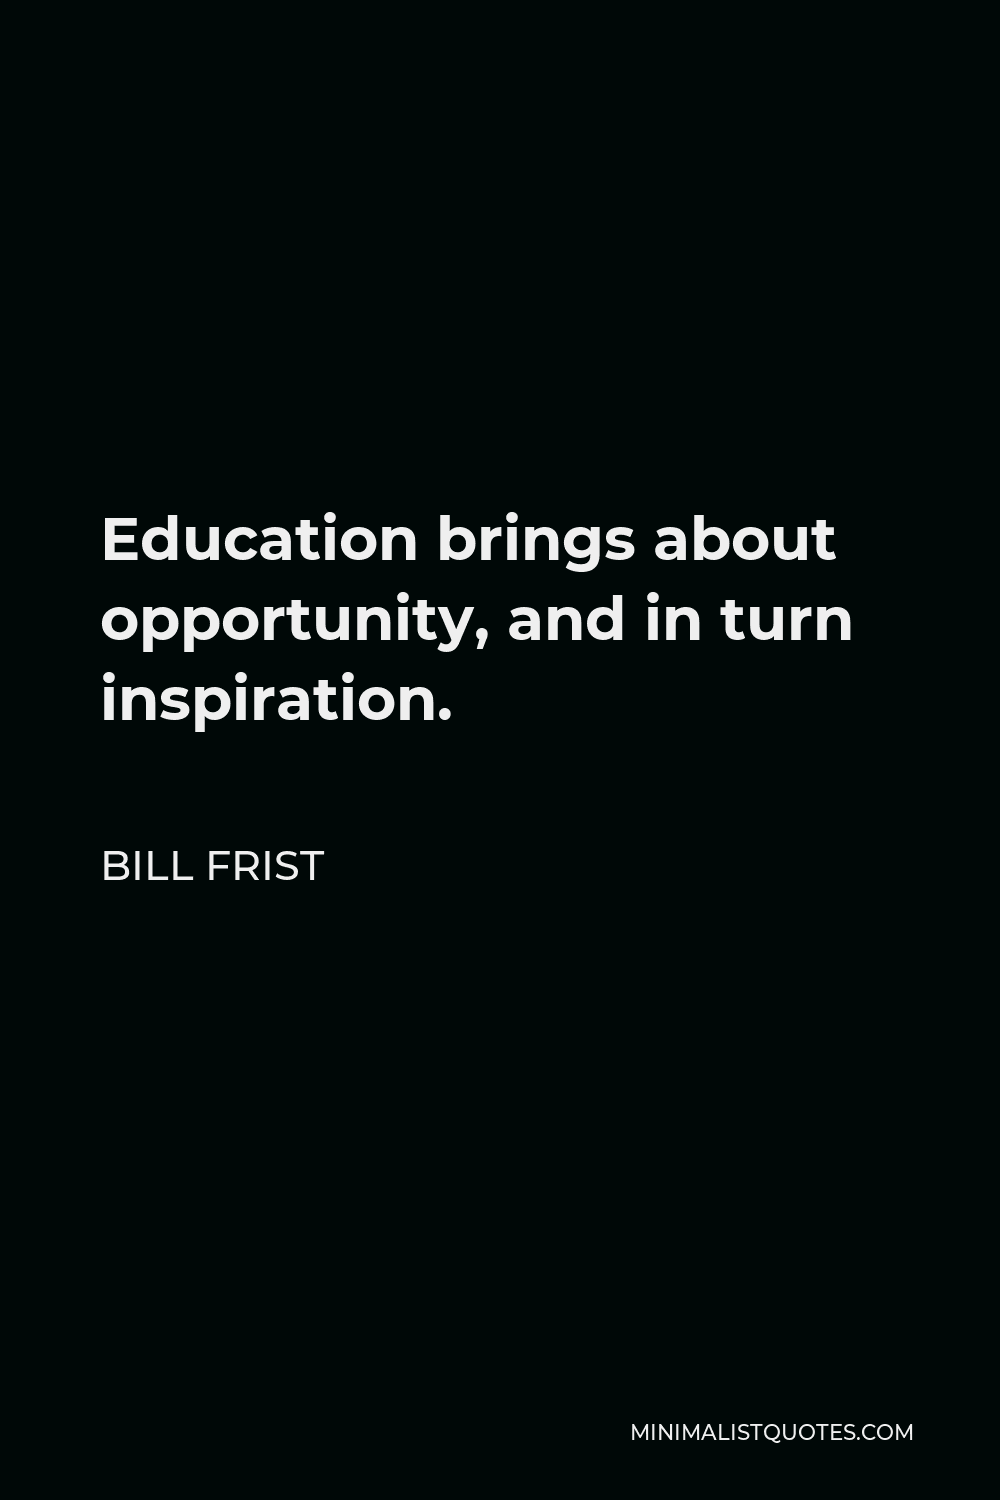 Bill Frist Quote - Education brings about opportunity, and in turn inspiration.